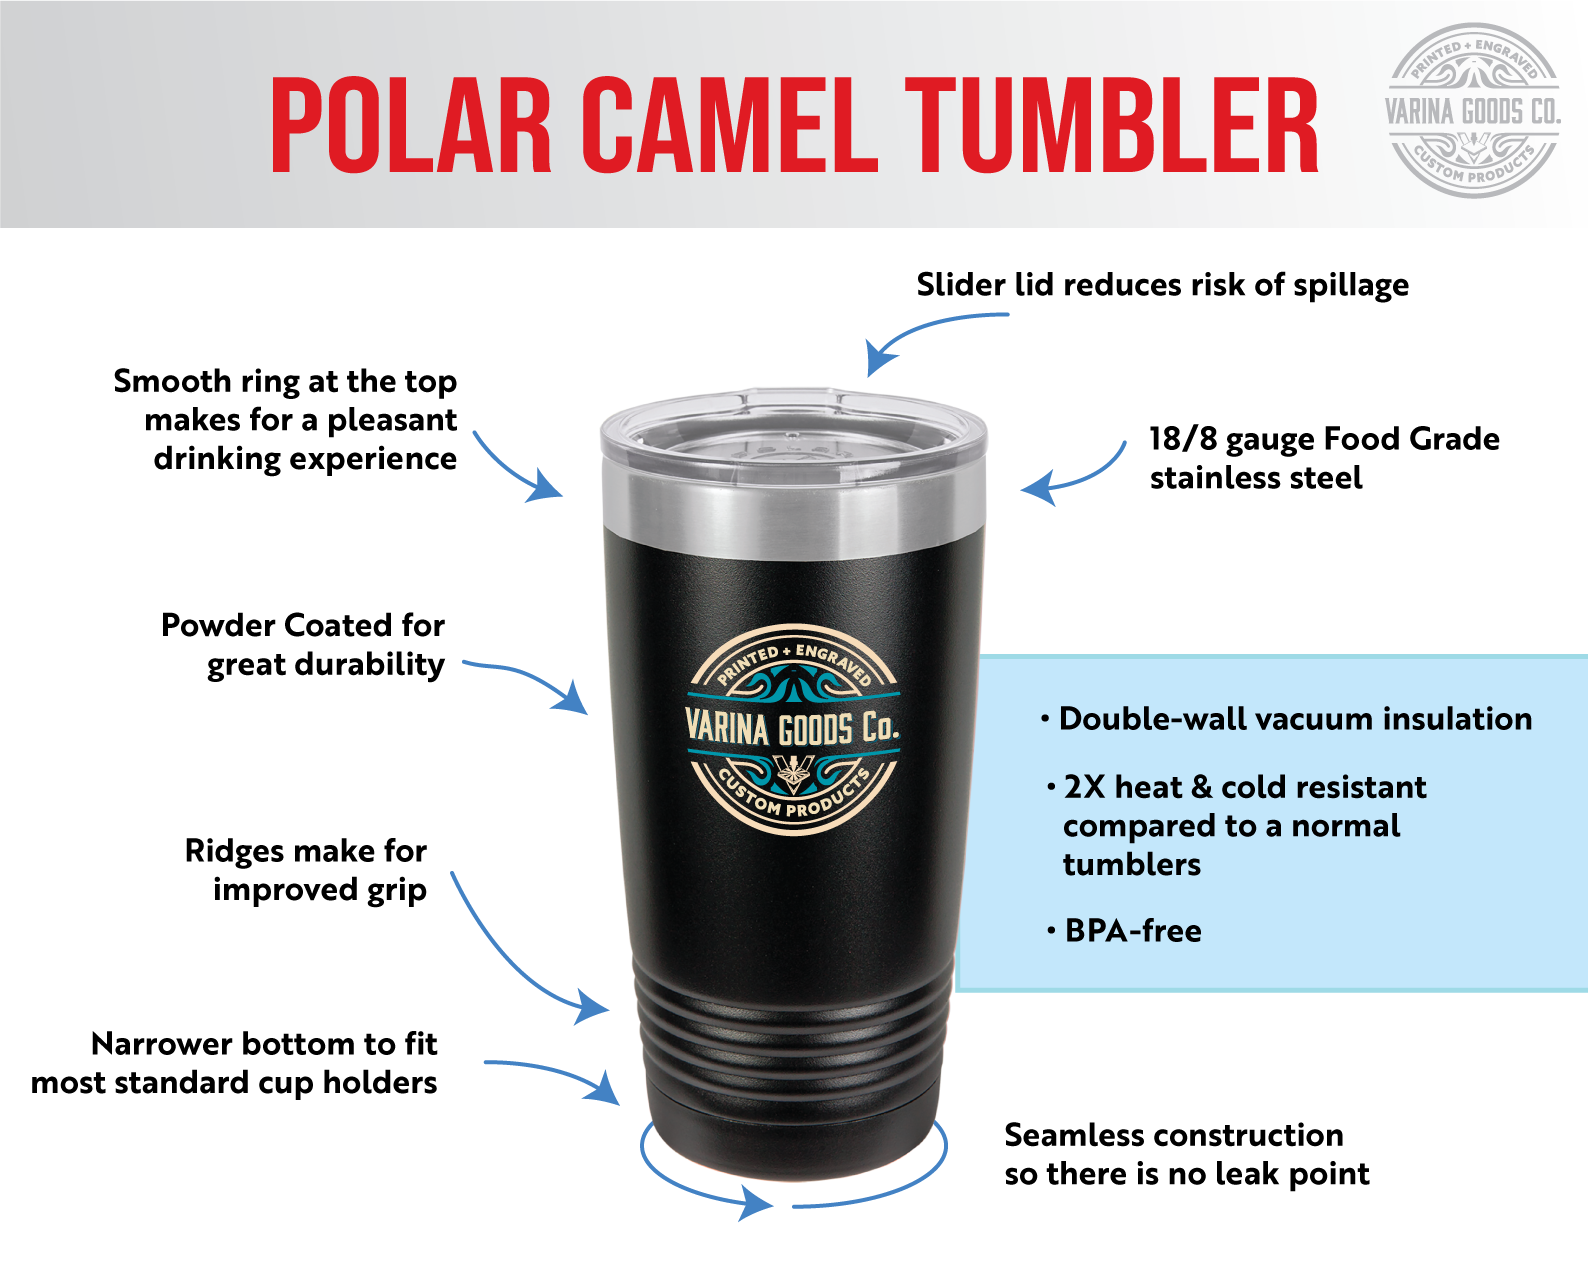 Polar Camel specs for 20 oz tumblers. Smooth ring at the top, powder coated, ridges for gripping, Narrow fit to fit in cup holders, BPA-free slider lid, 18/8 food grade stainless steel, seamless construction, double -wall vacuum insulation, and 2X heat and cold resistant compared to a normal tumbler.